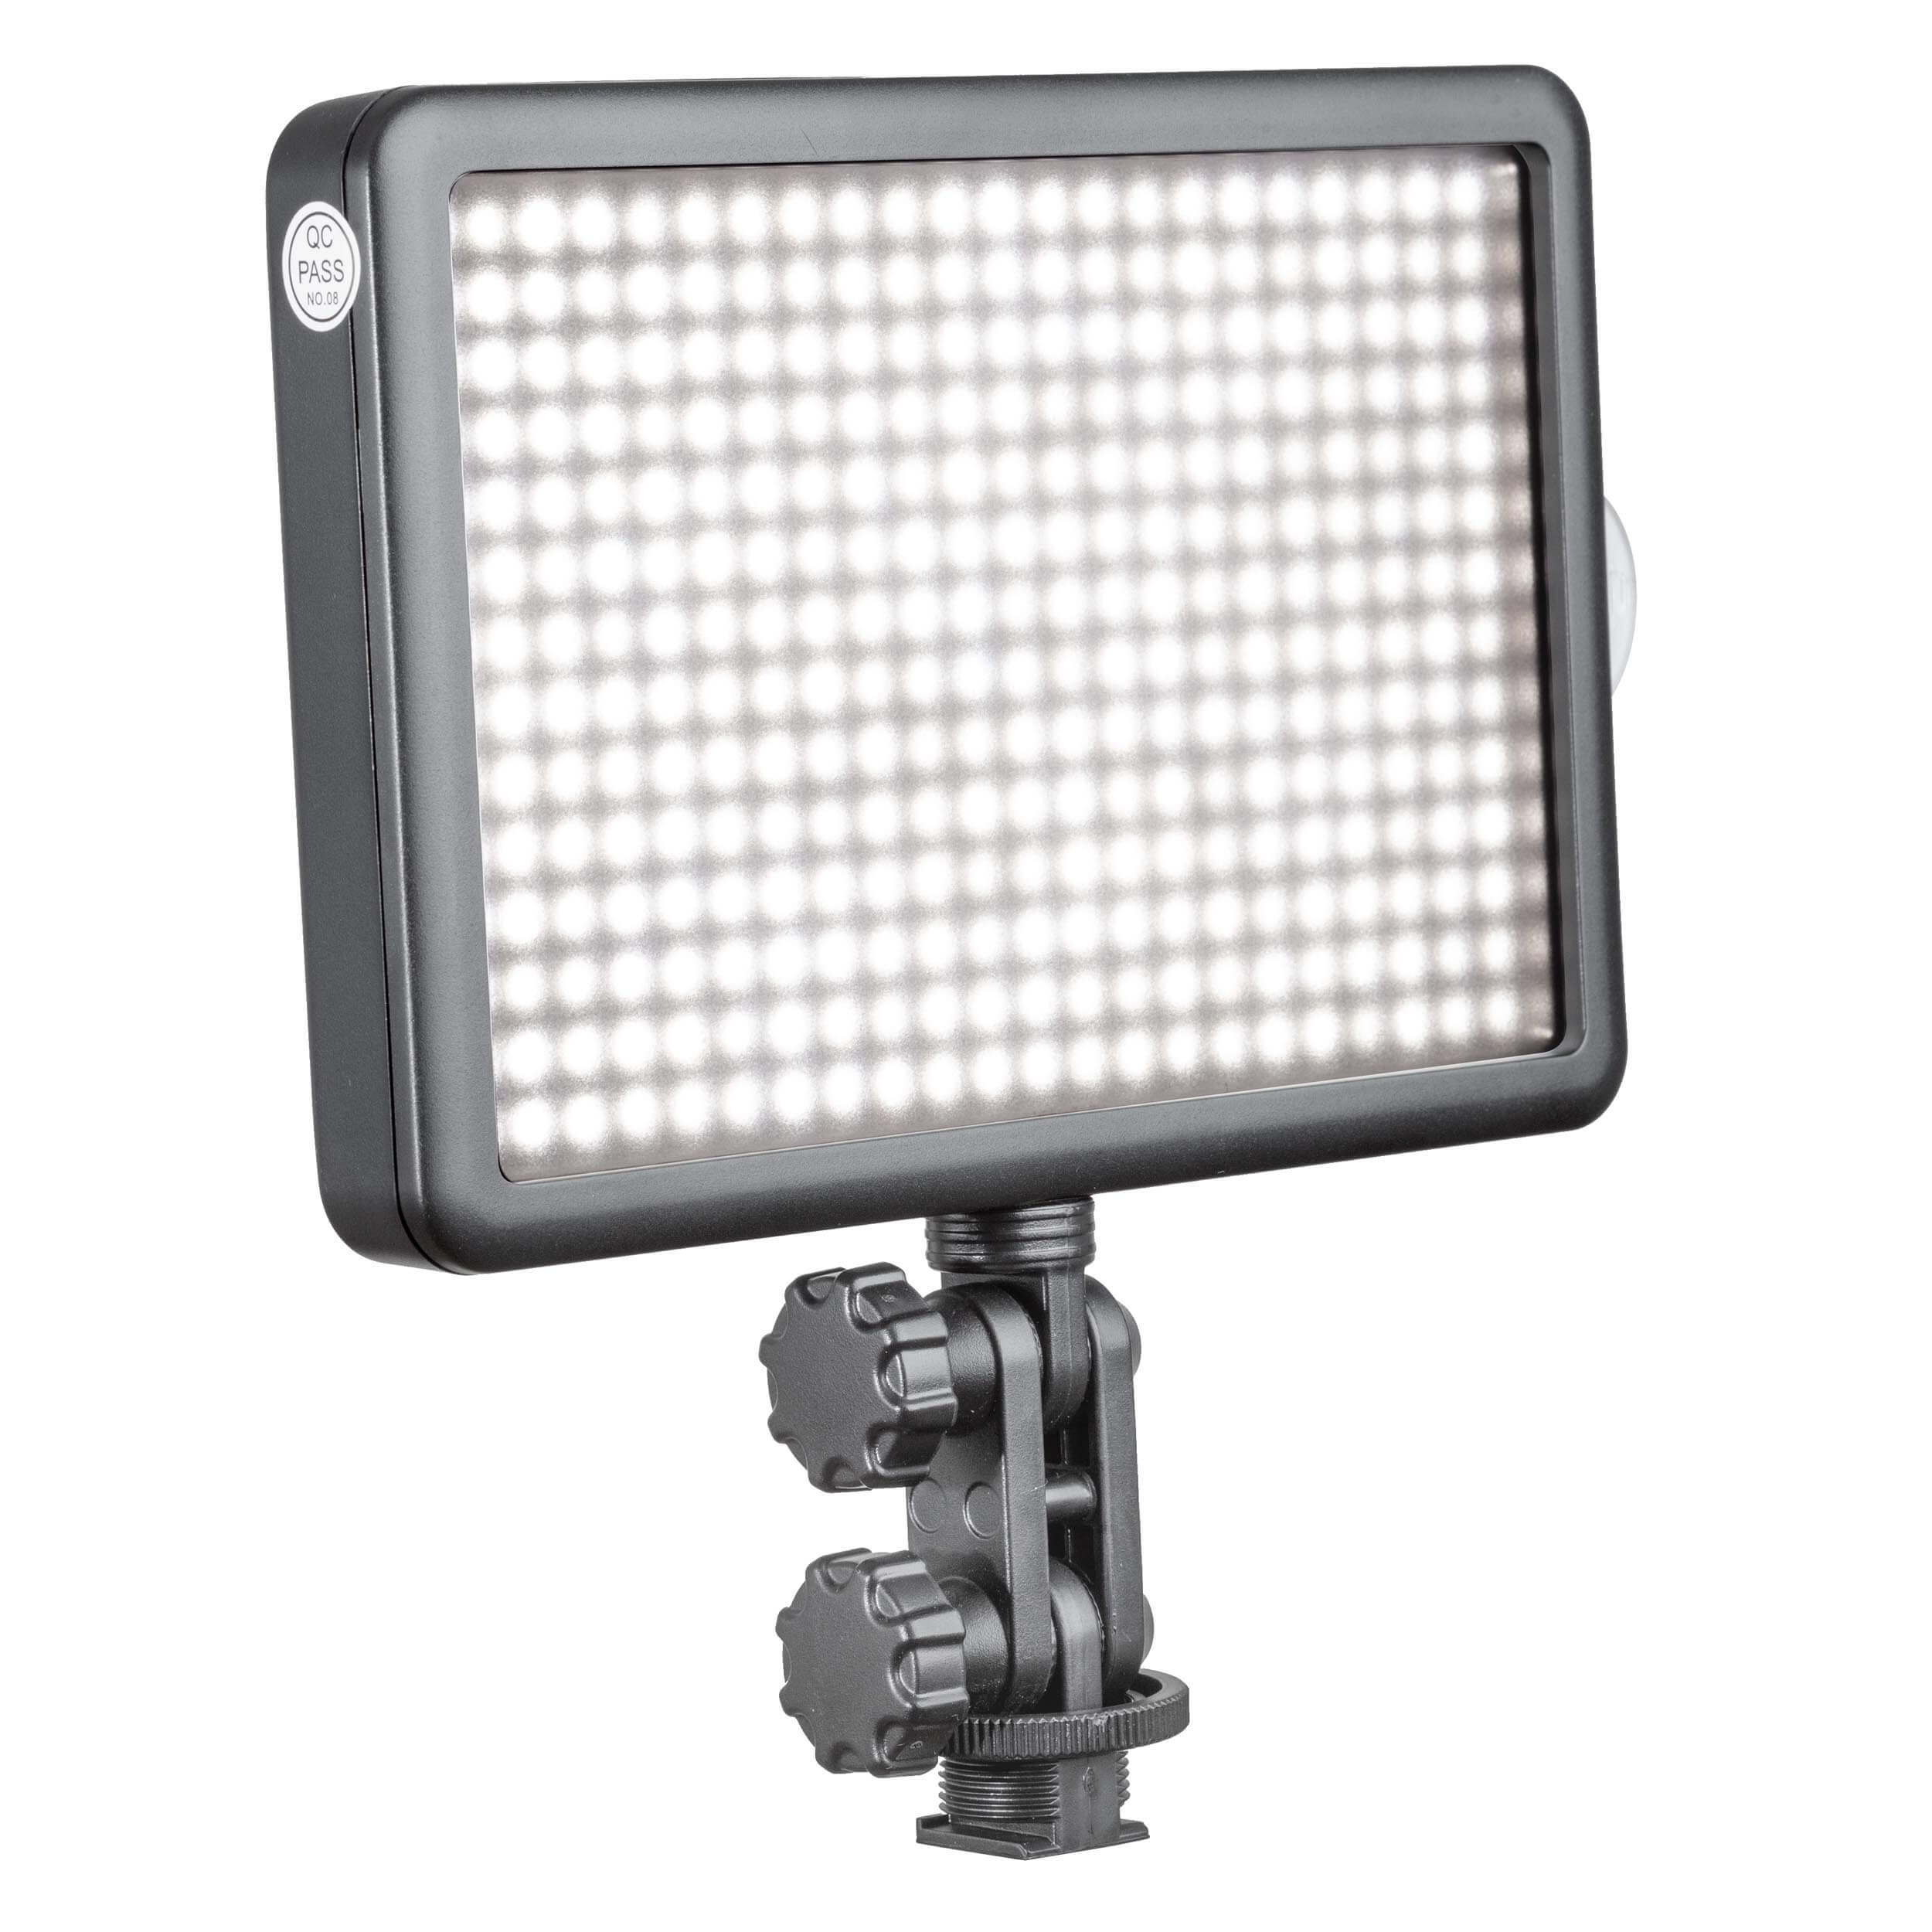 LED308D Small-Portable LED Video Light Stop Motion By PixaPro 